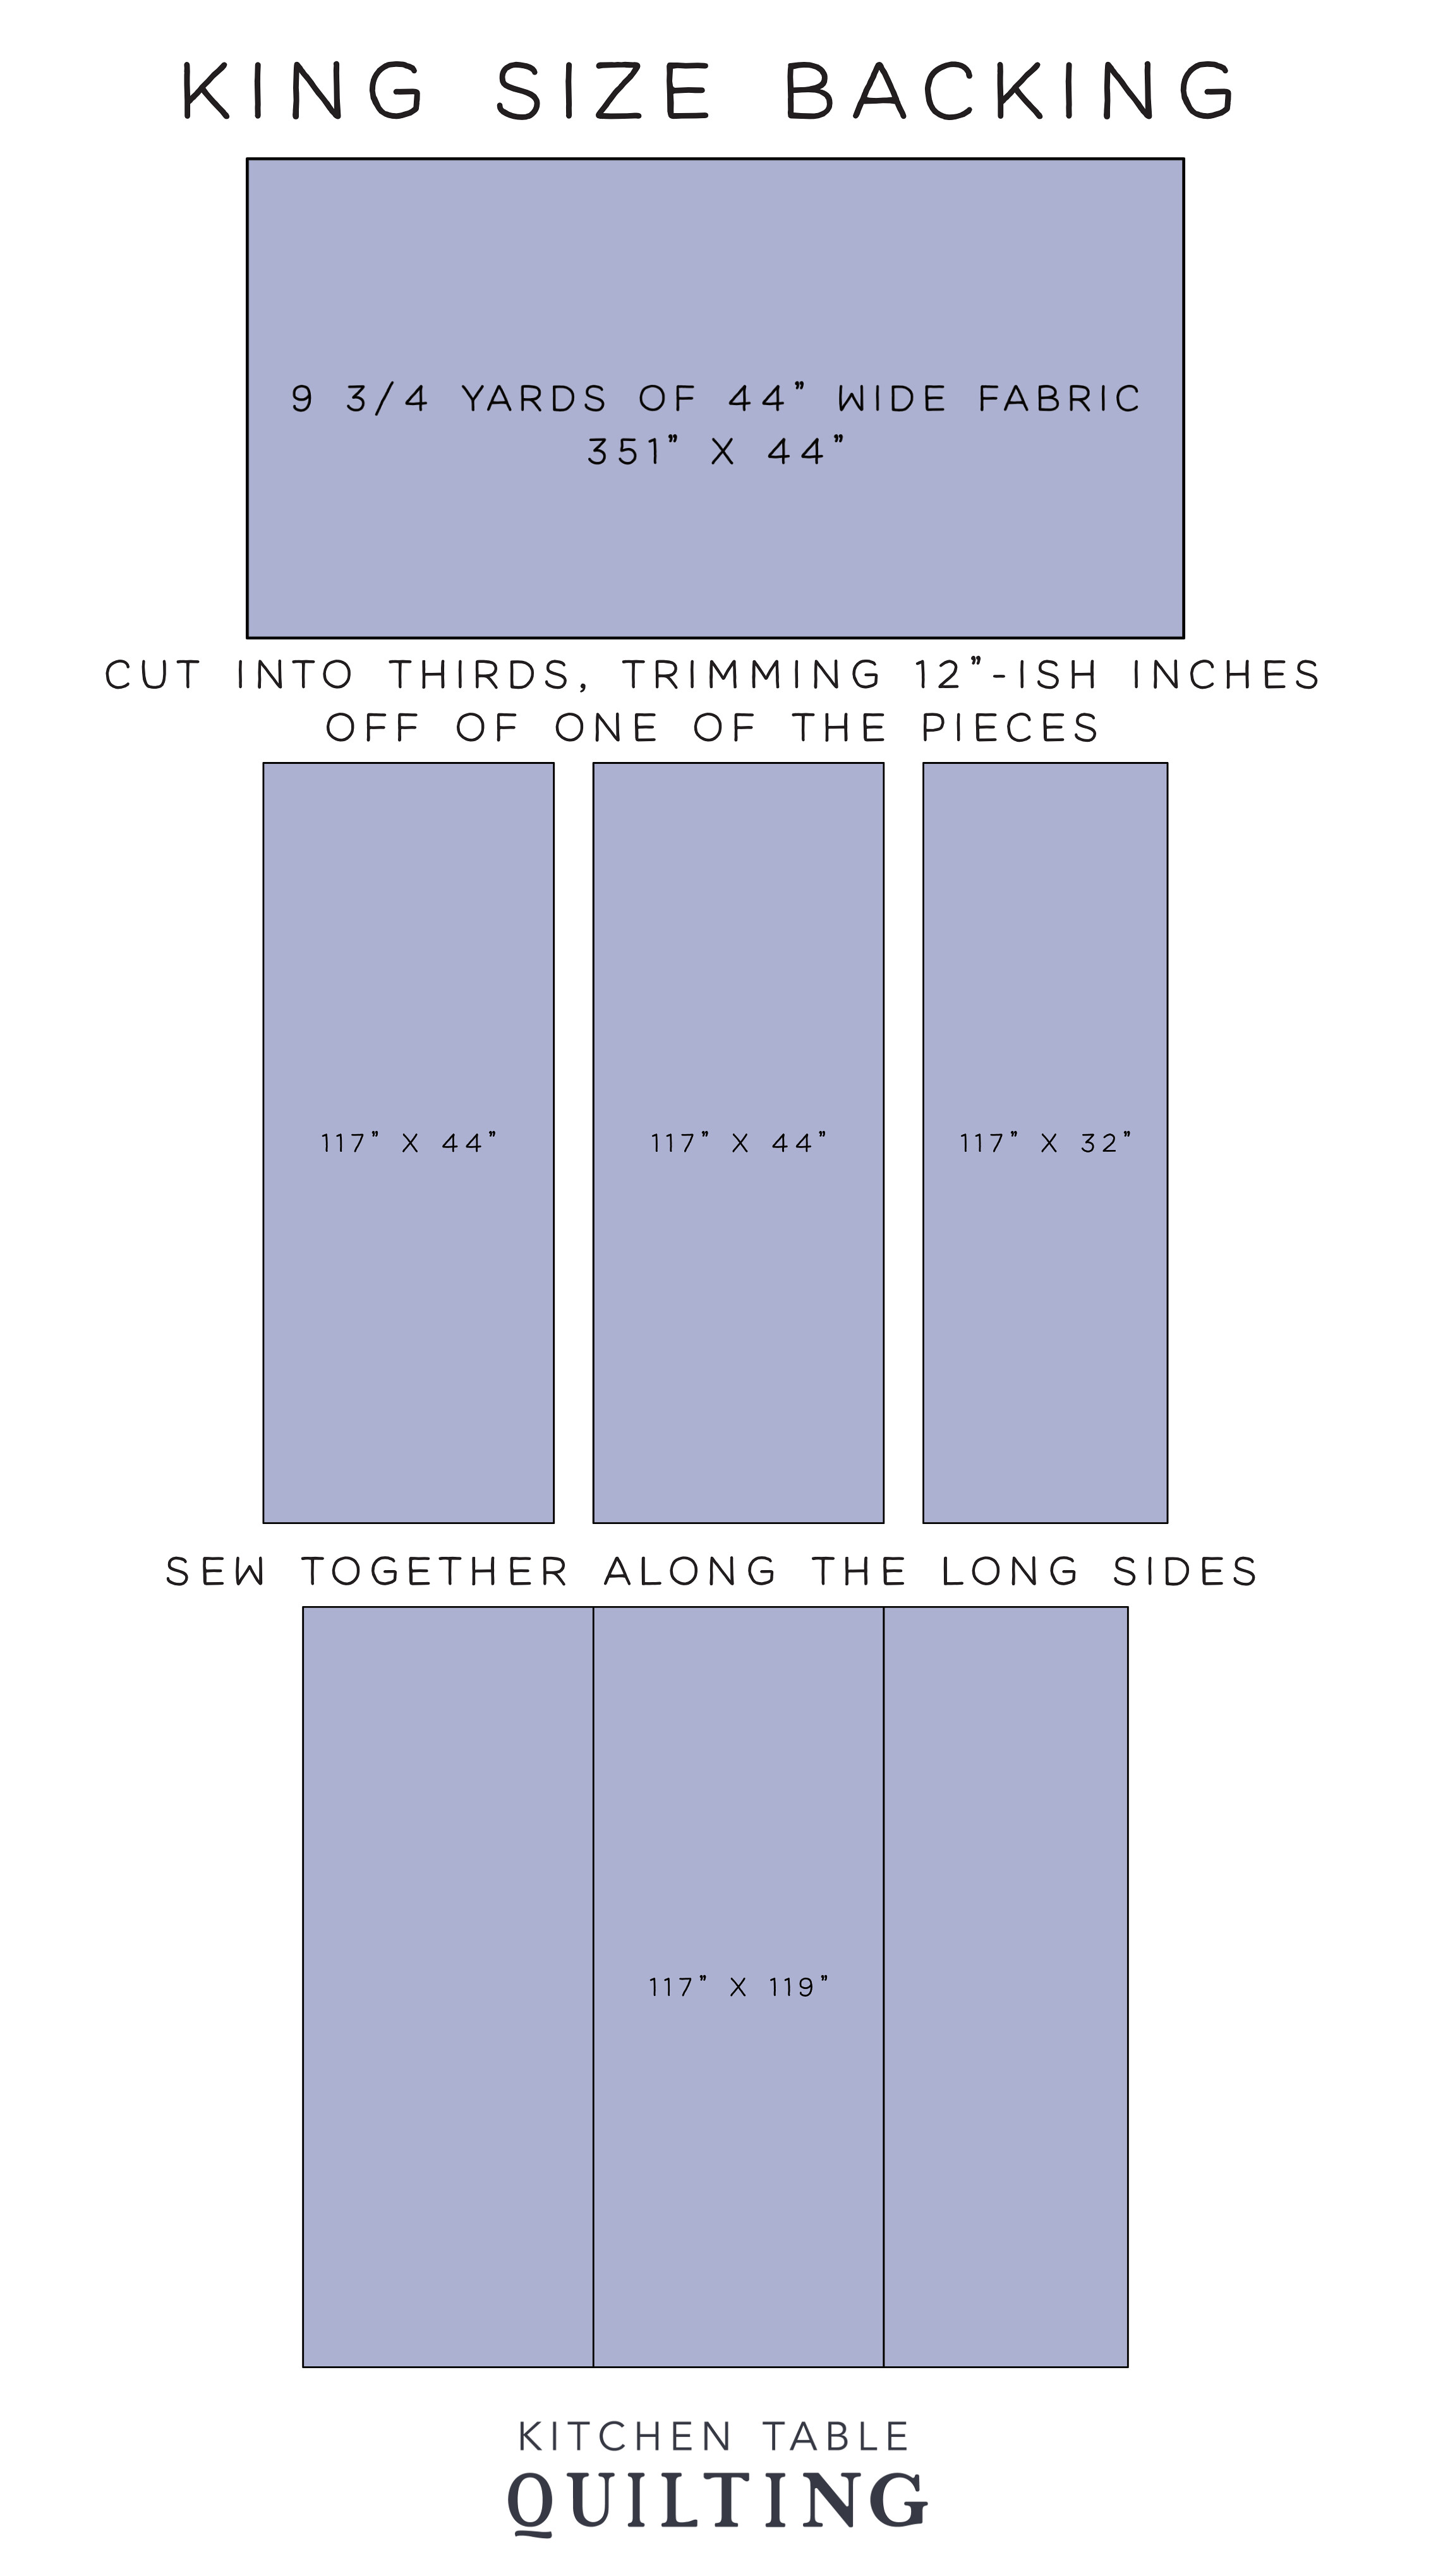 King Size Backing Diagram - Kitchen Table Quilting